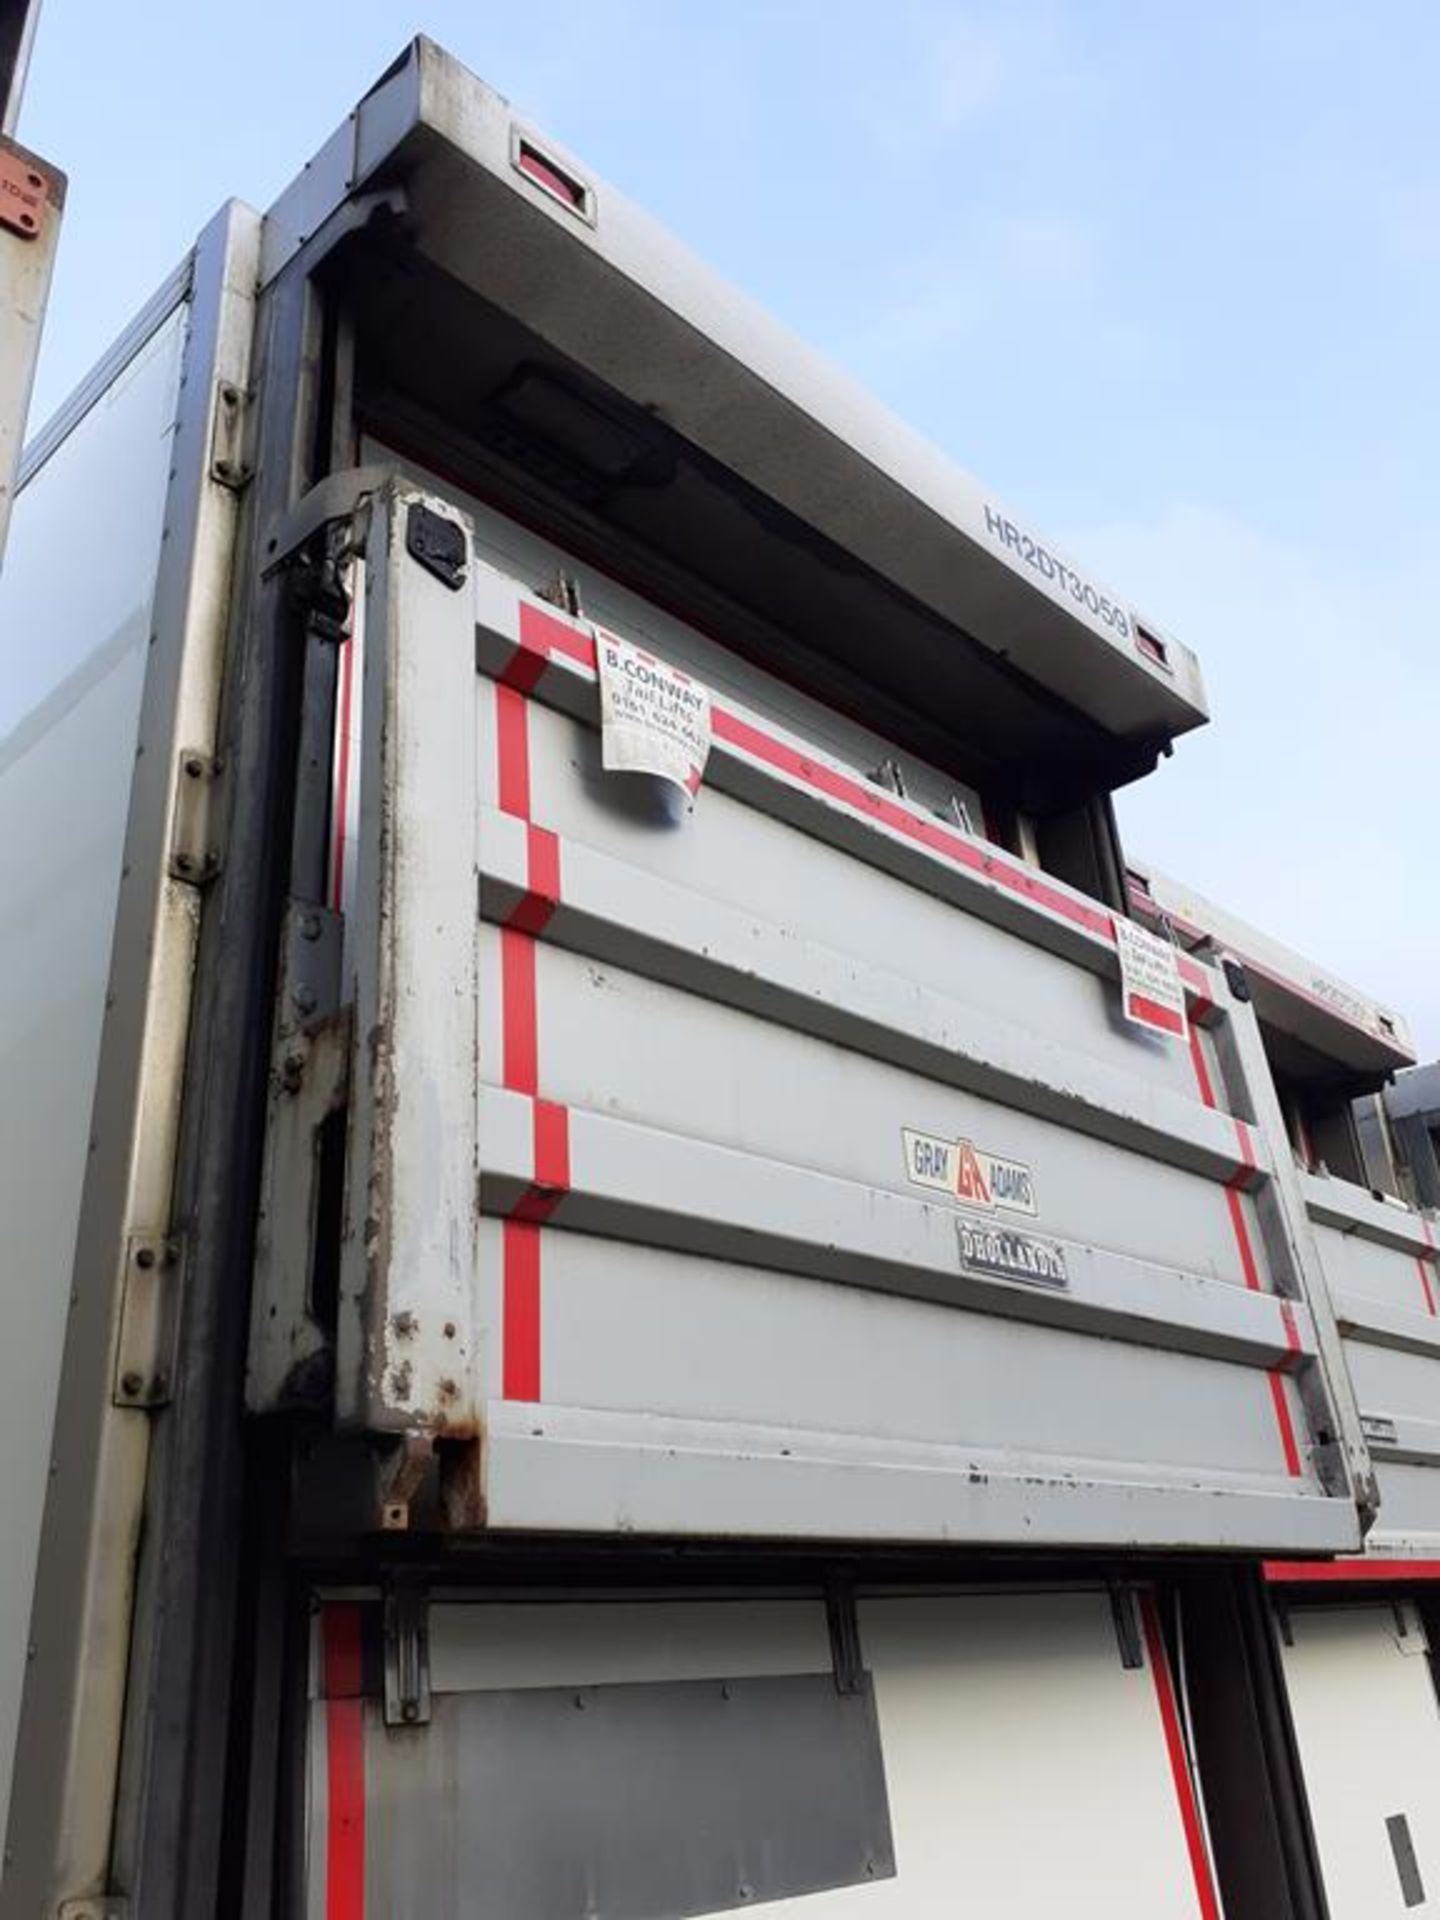 High Specification Gray and Adams Refrigerated double deck trailer - Image 14 of 21